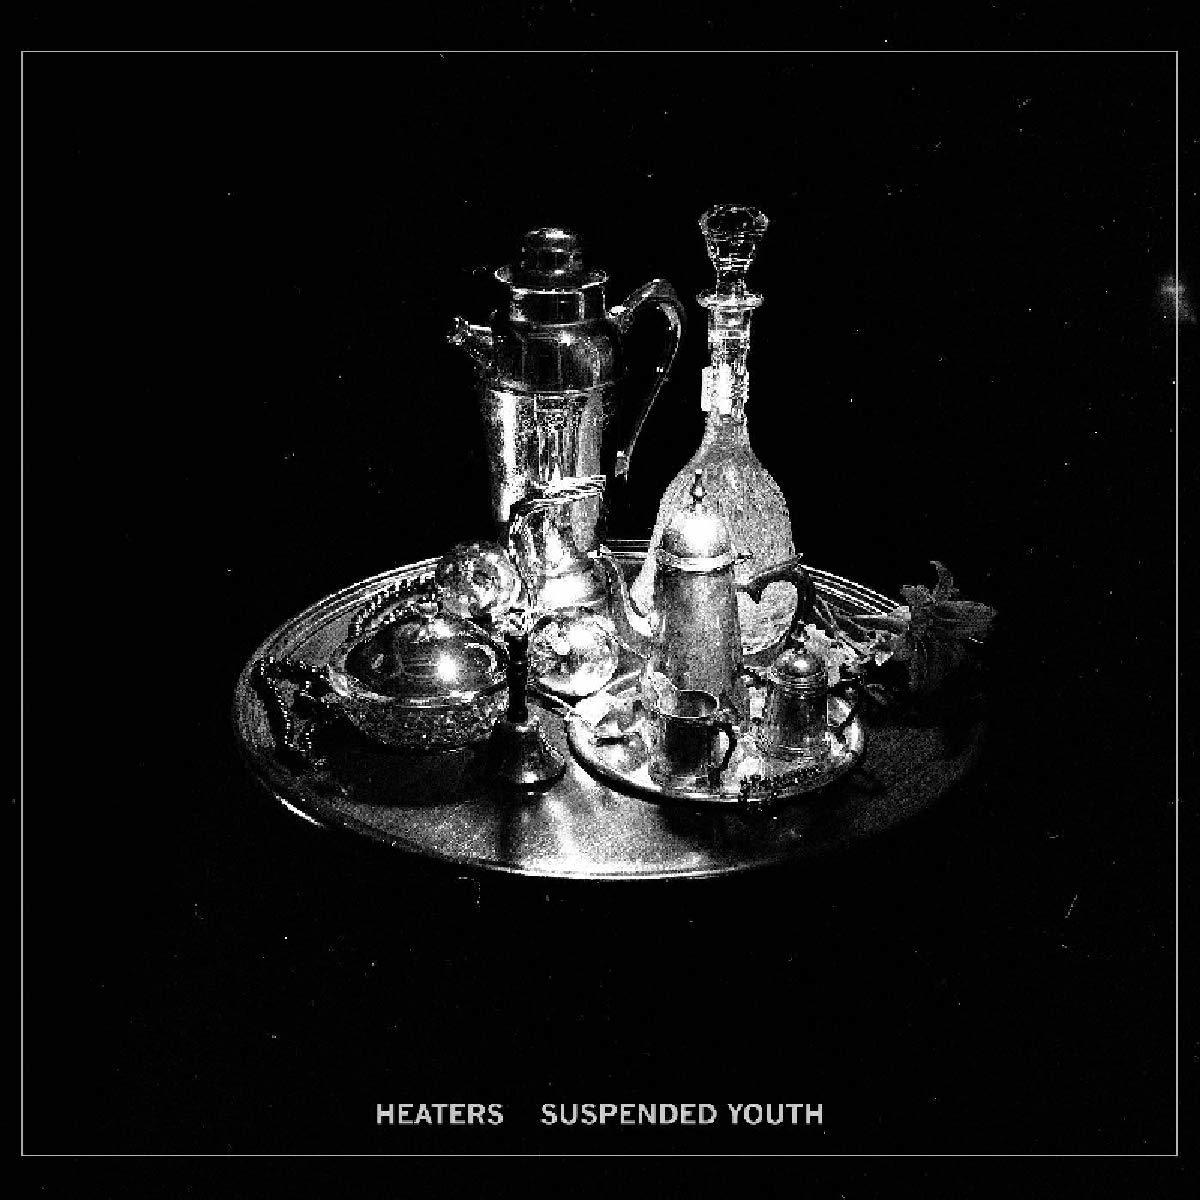 Youth - Suspended (Vinyl) - The Heaters